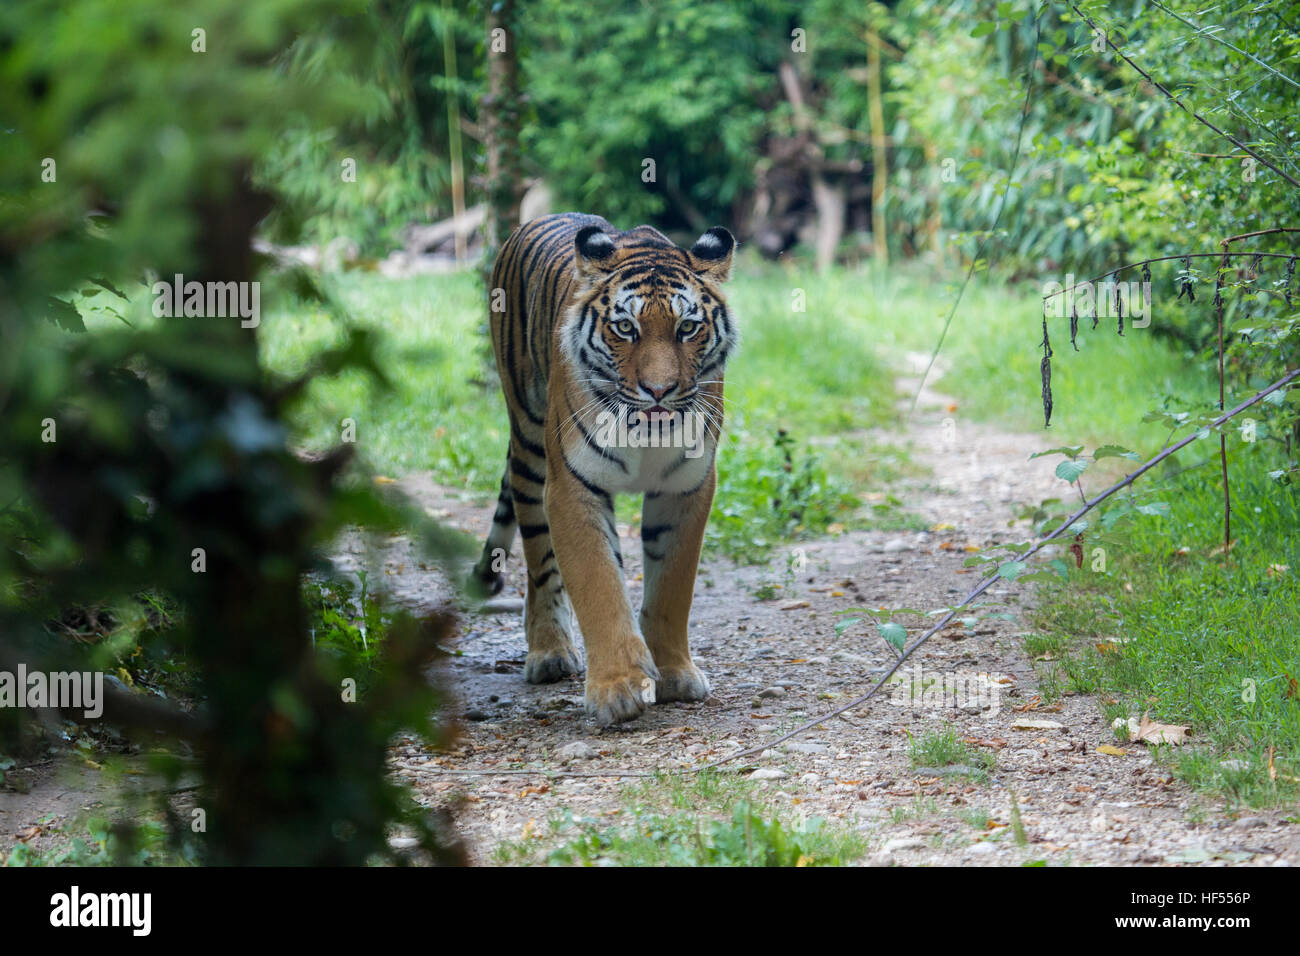 Frontal view of a siberian tiger or Amur tiger, Panthera tigris altaica, walking along a path trail in the forest. Stock Photo